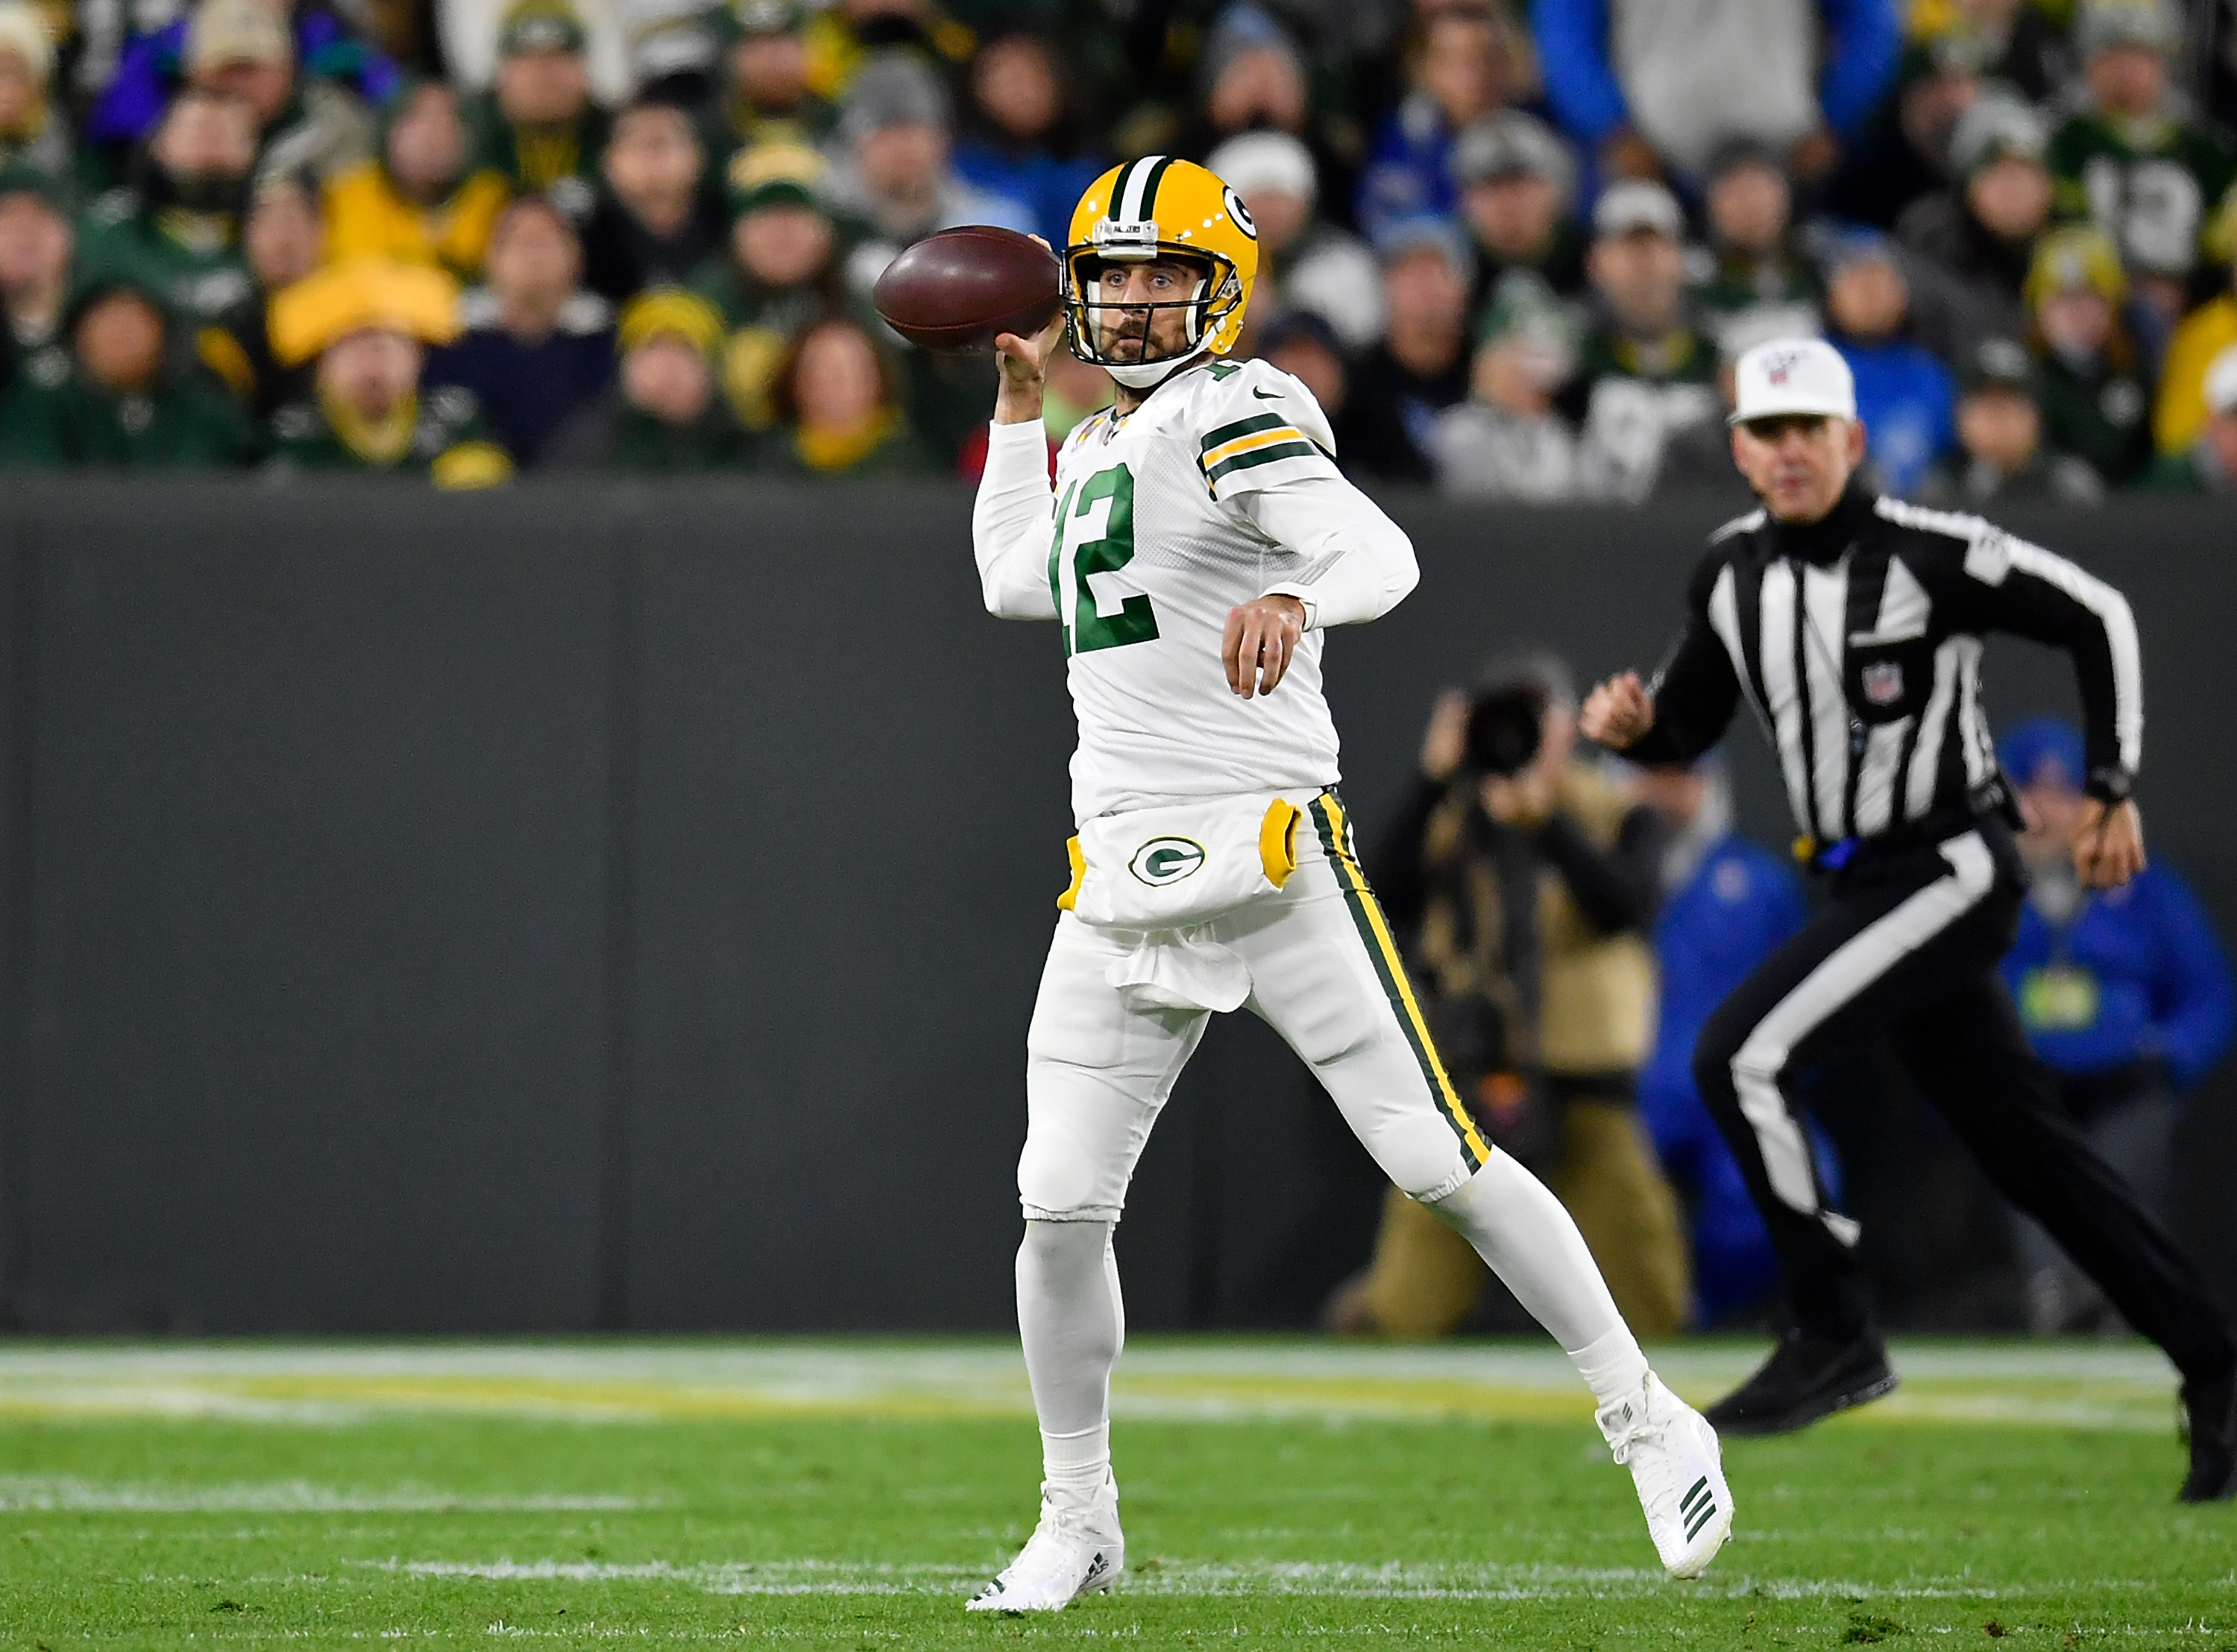 Packers to wear all-white “Color Rush” uniforms vs Titans - Acme